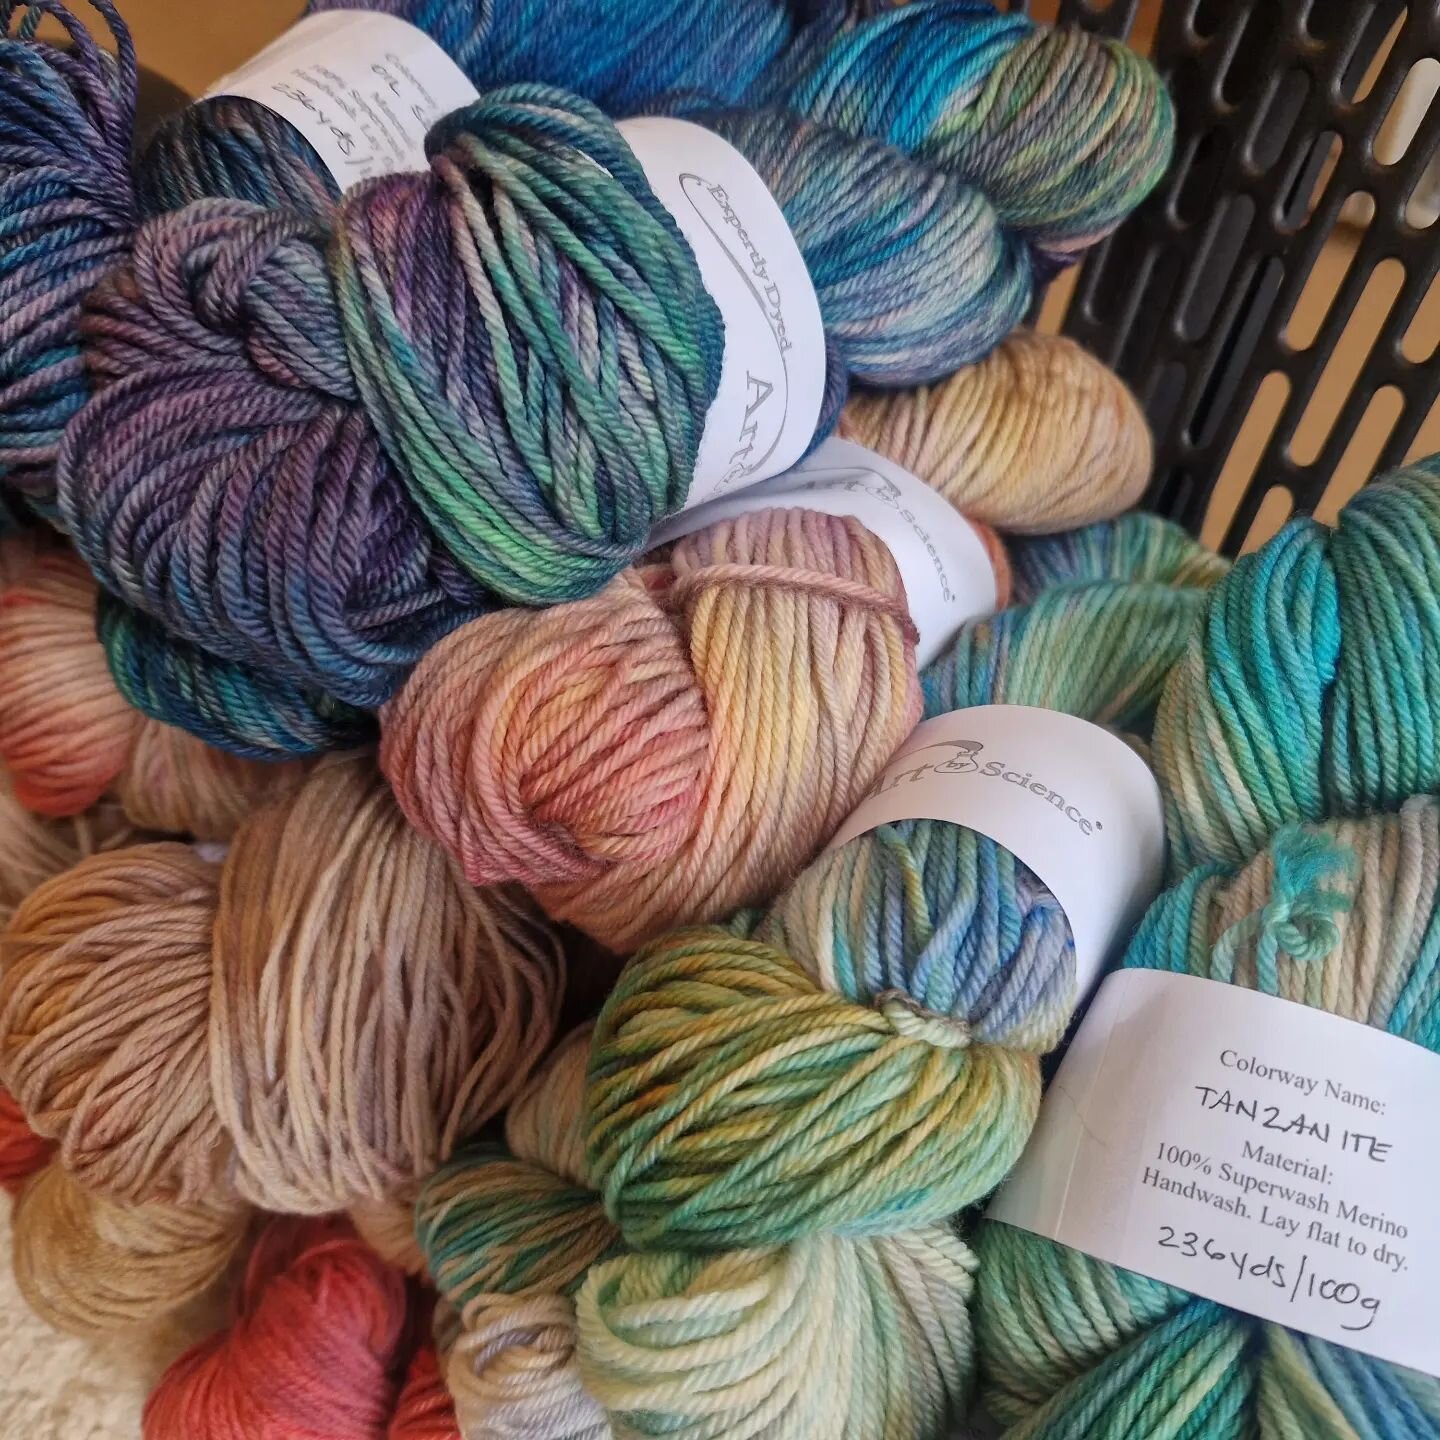 The @cotswoldwoolweekend is rapidly approaching and I've been busy dyeing, labelling, and organising everything! I absolutely love seeing my yarn all dolled up with professional touches (like labels!) as it really legitimises my return to the fiberar